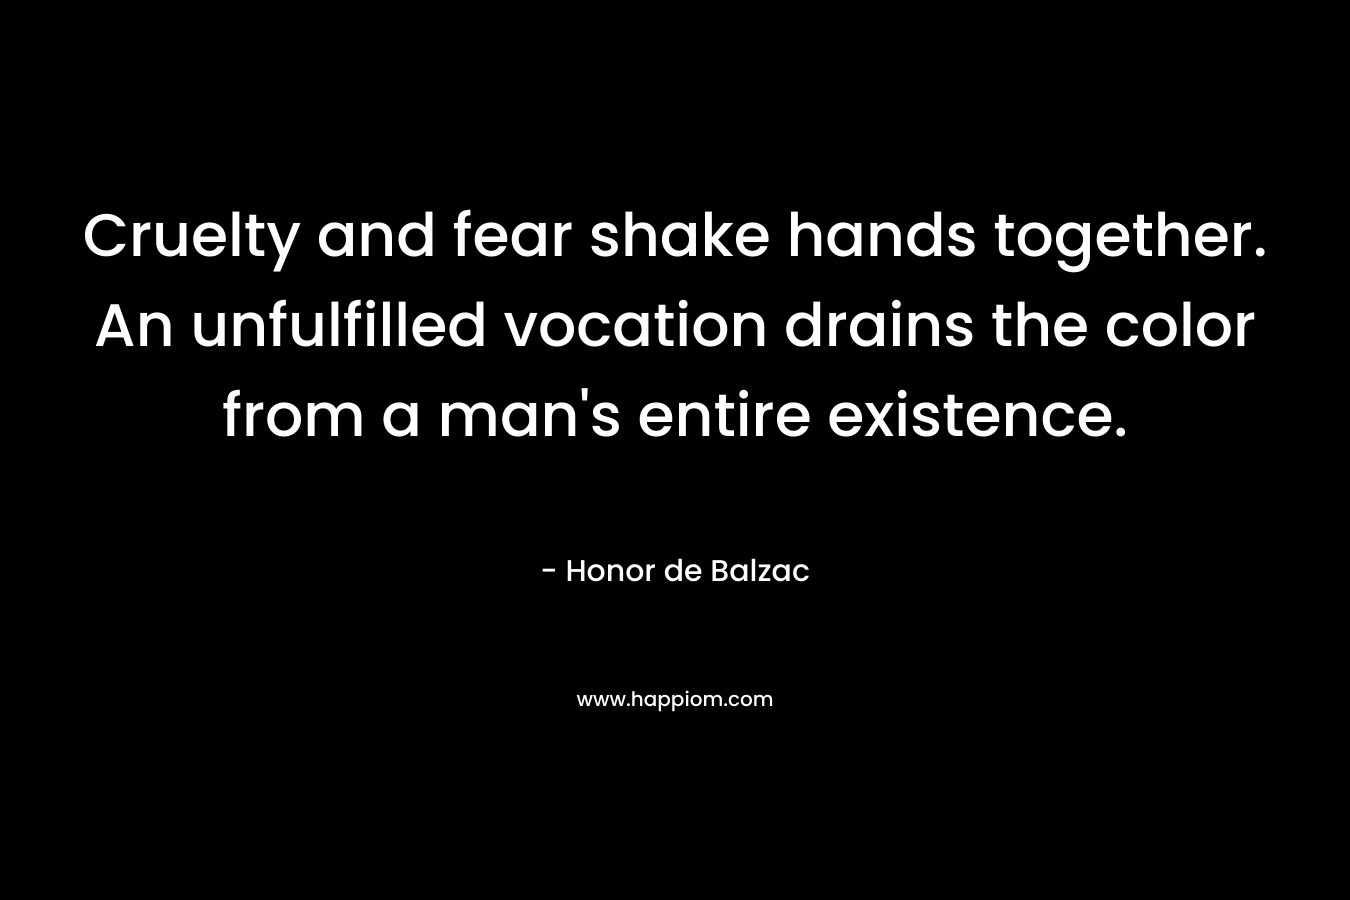 Cruelty and fear shake hands together. An unfulfilled vocation drains the color from a man’s entire existence. – Honor de Balzac